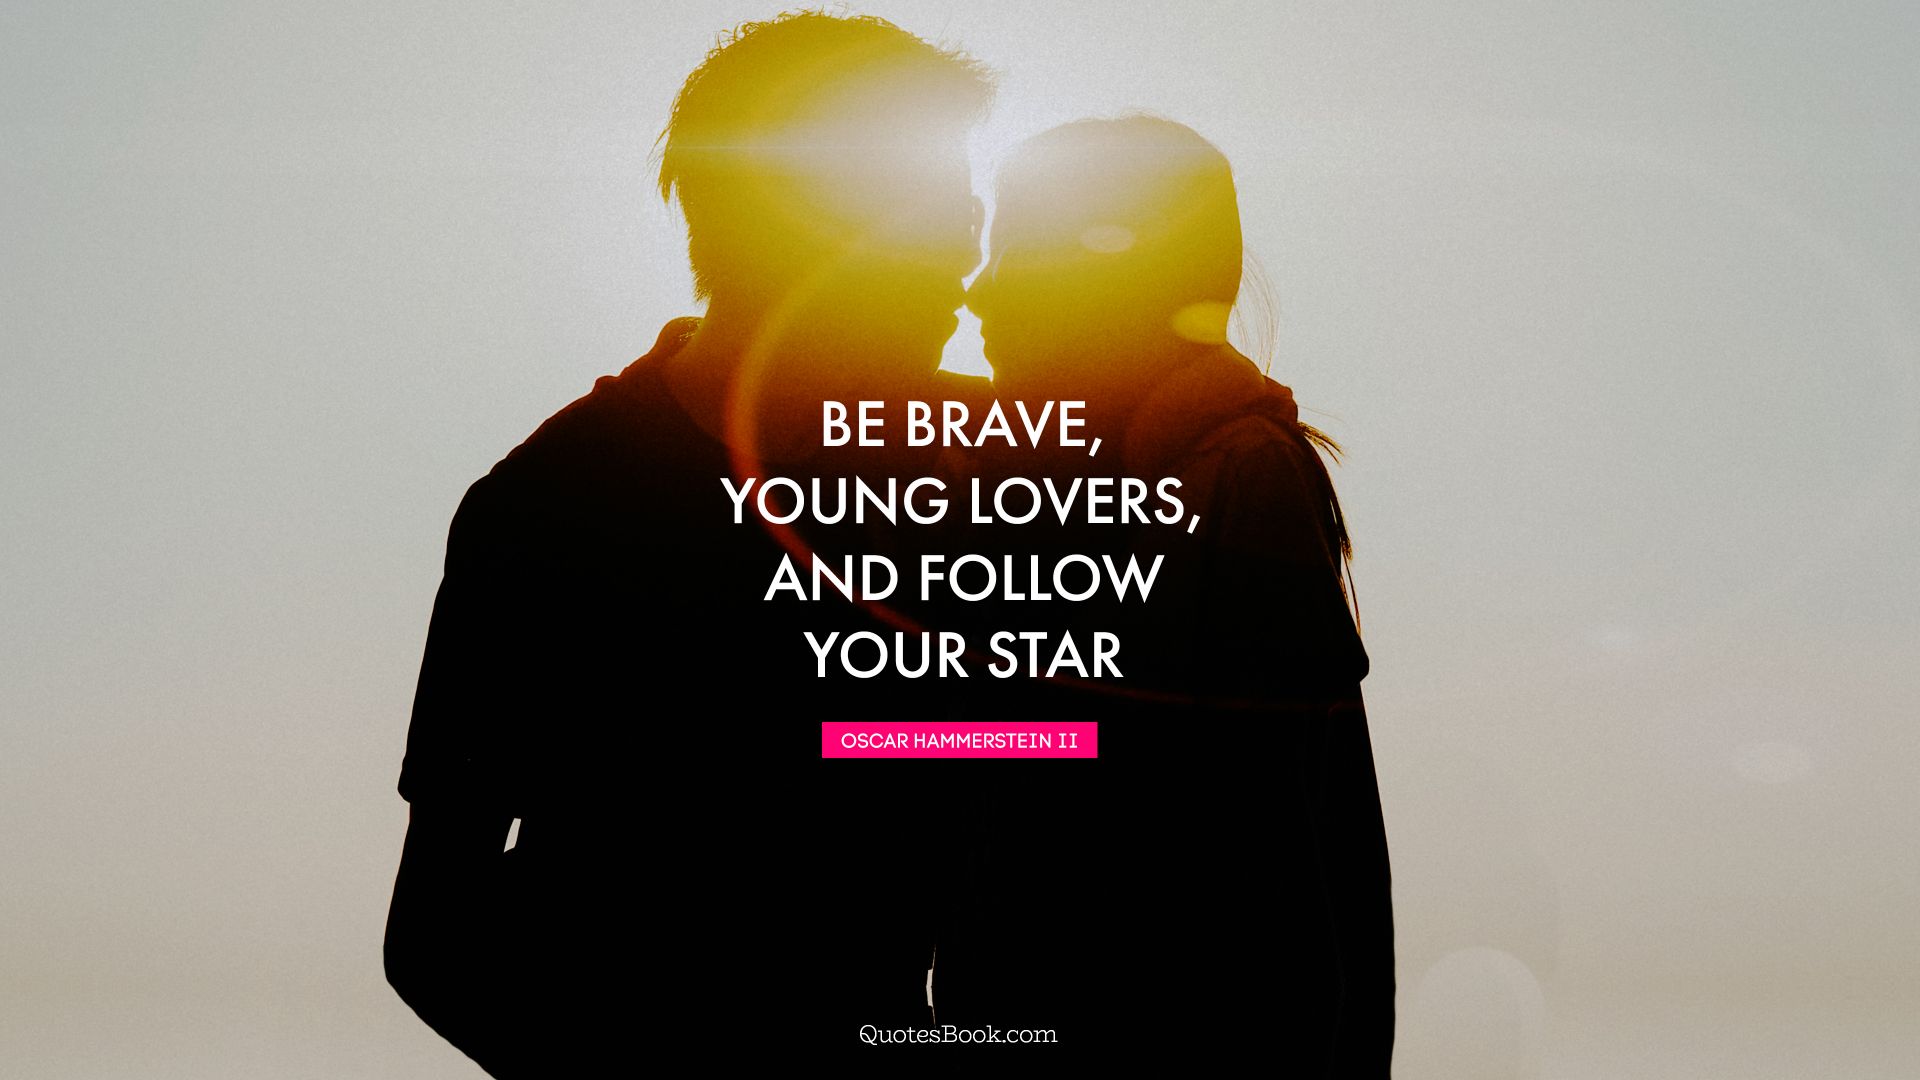 Be brave, young lovers, and follow your star. - Quote by Oscar Hammerstein II